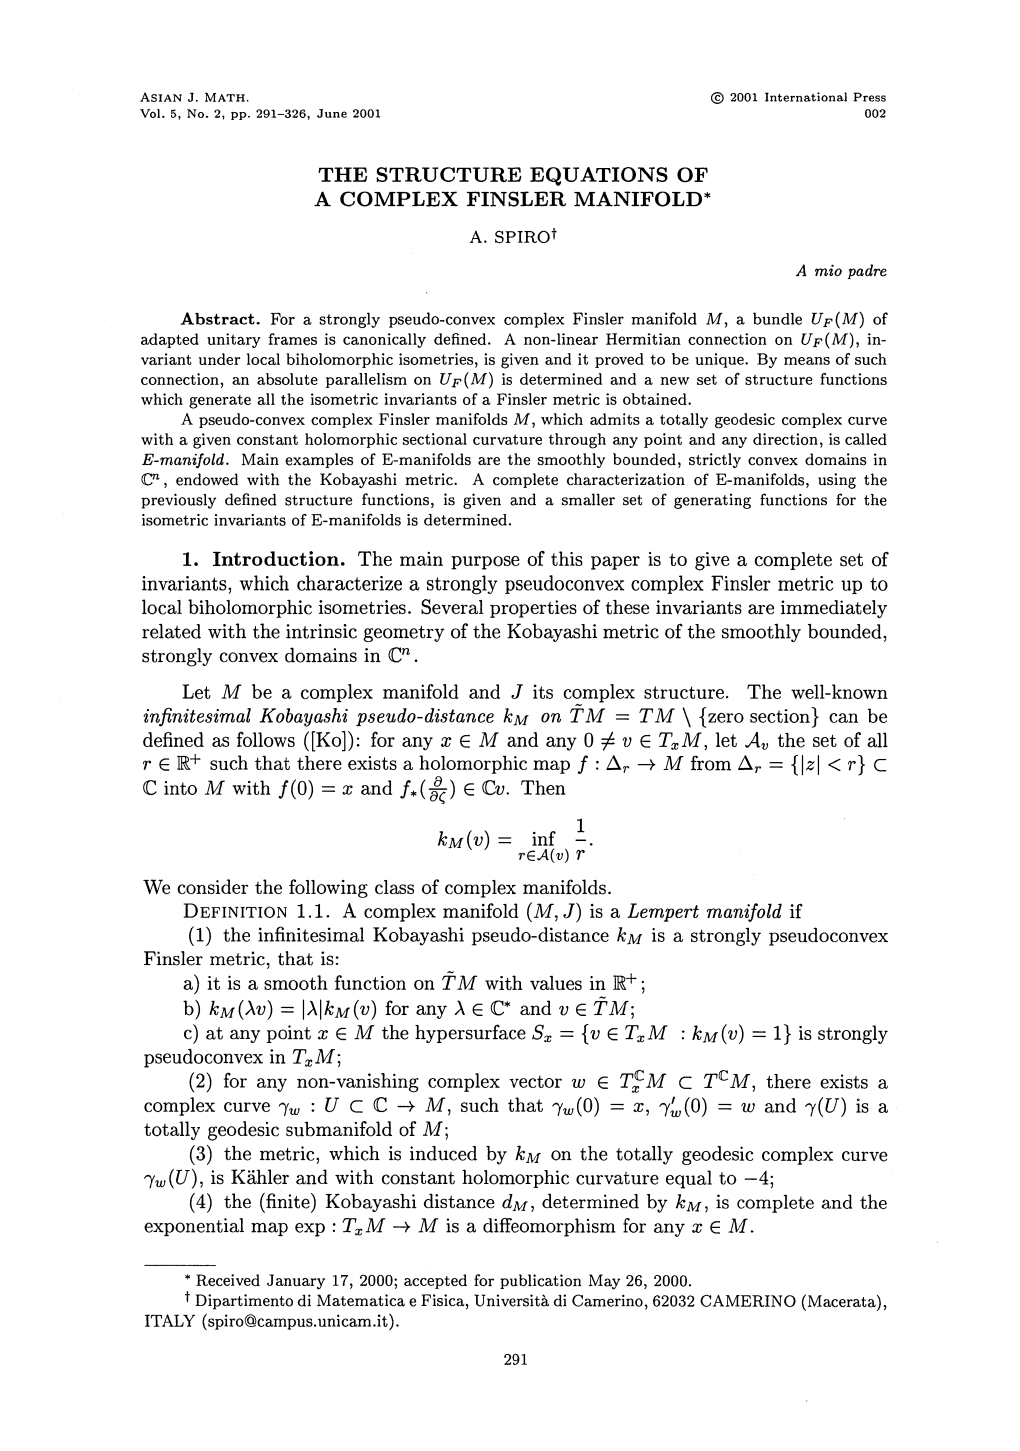 The Structure Equations of a Complex Finsler Manifold* 1